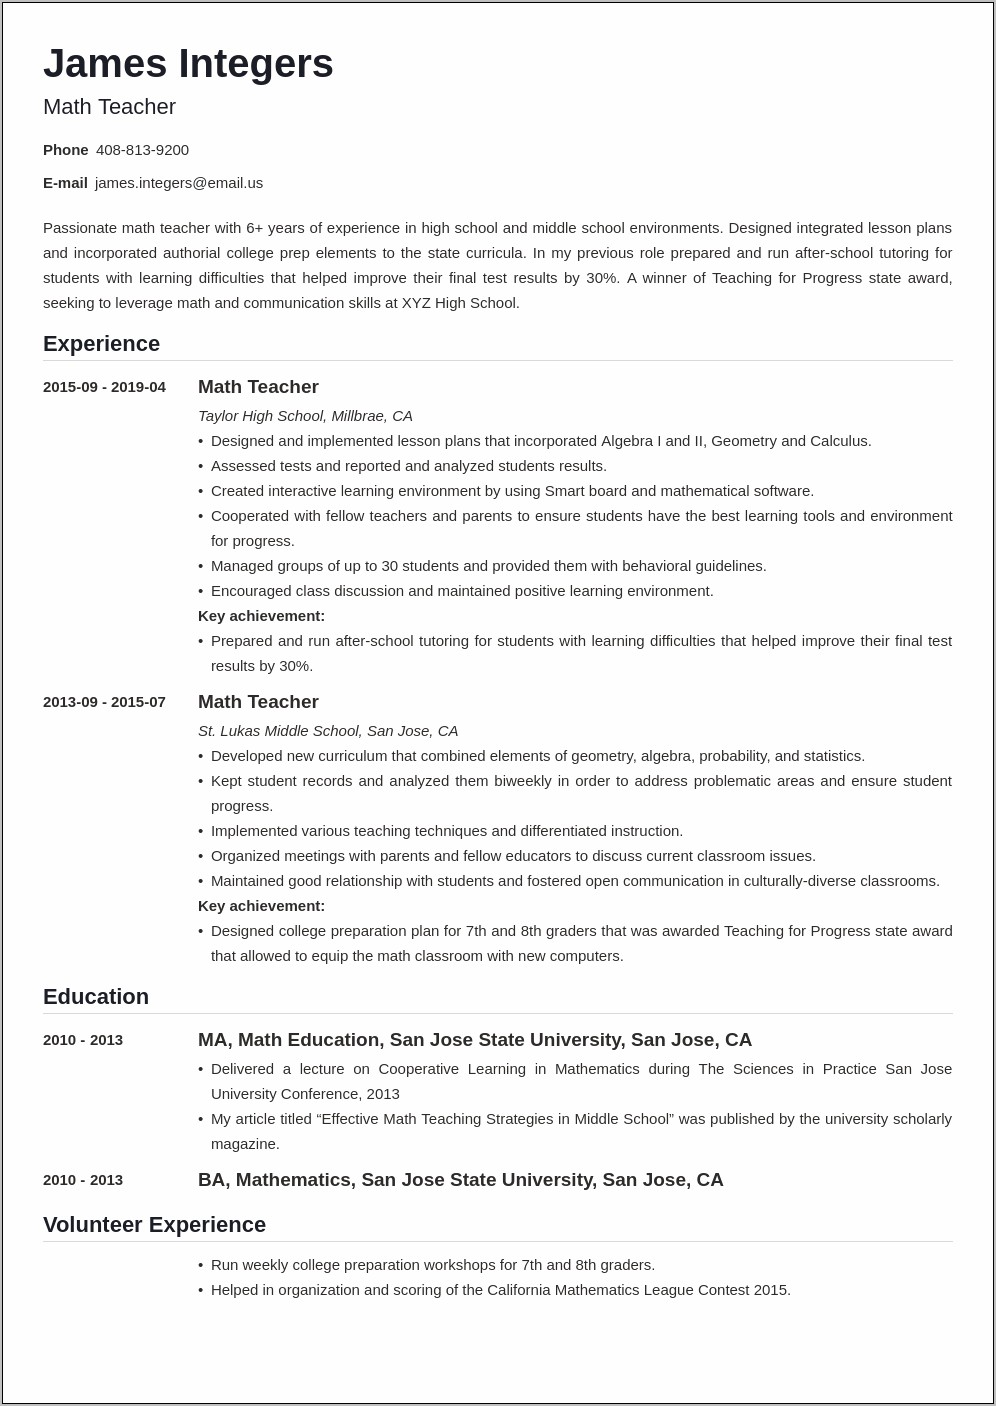 Resume Experience Section Middle School Teacher